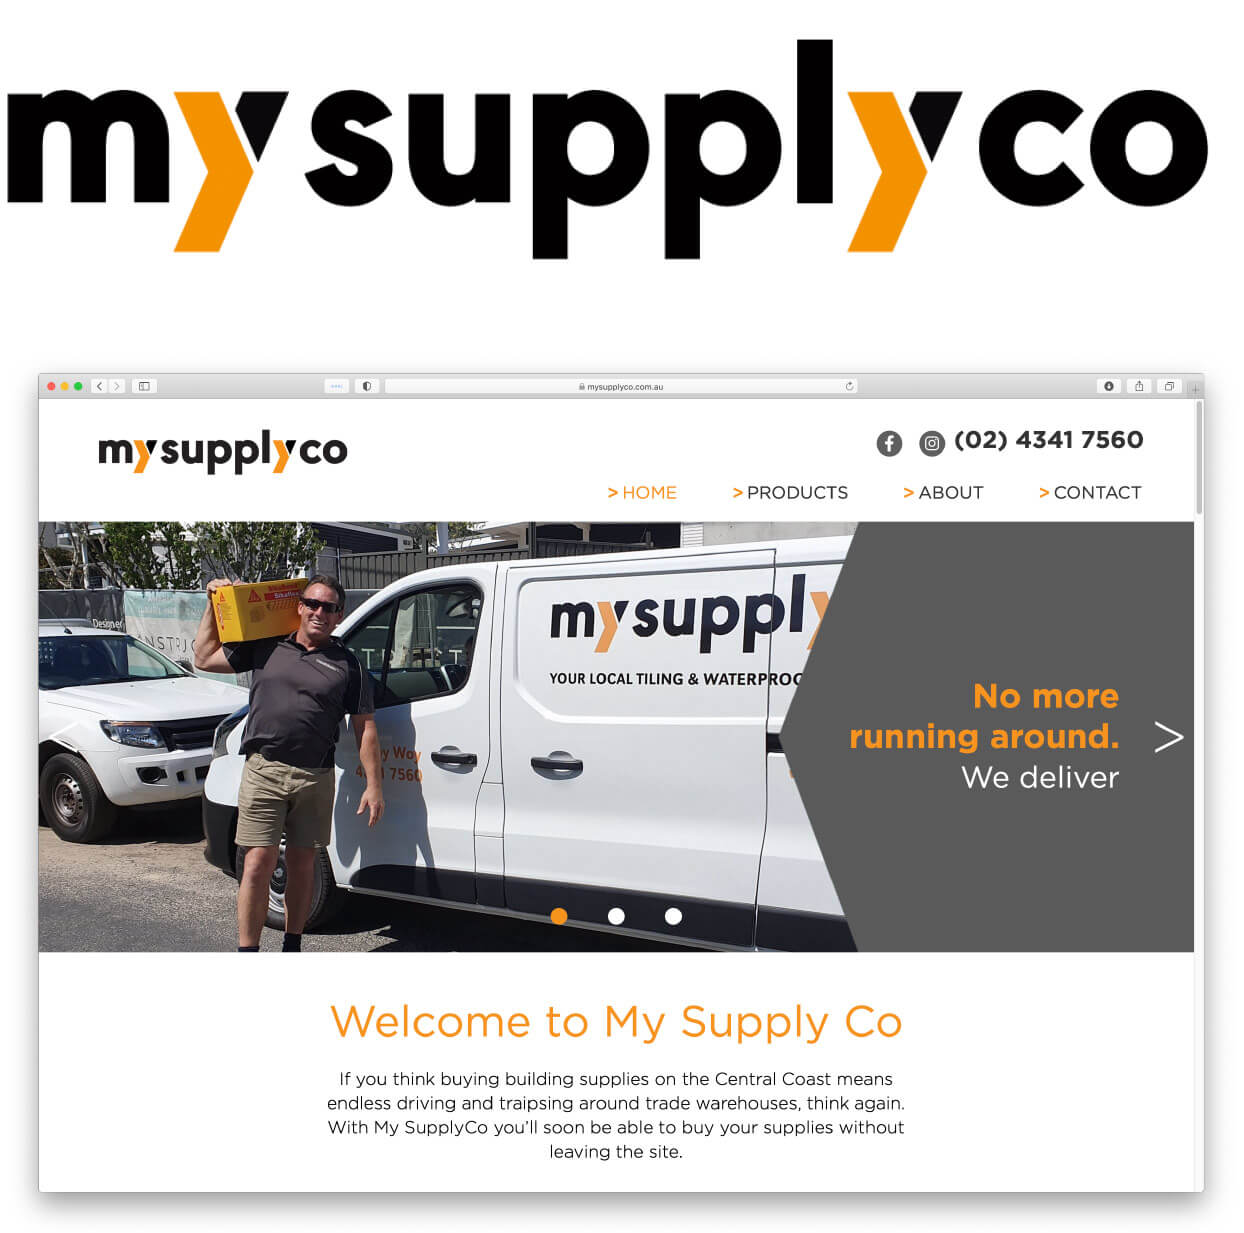 My Supply Co Branding and Website